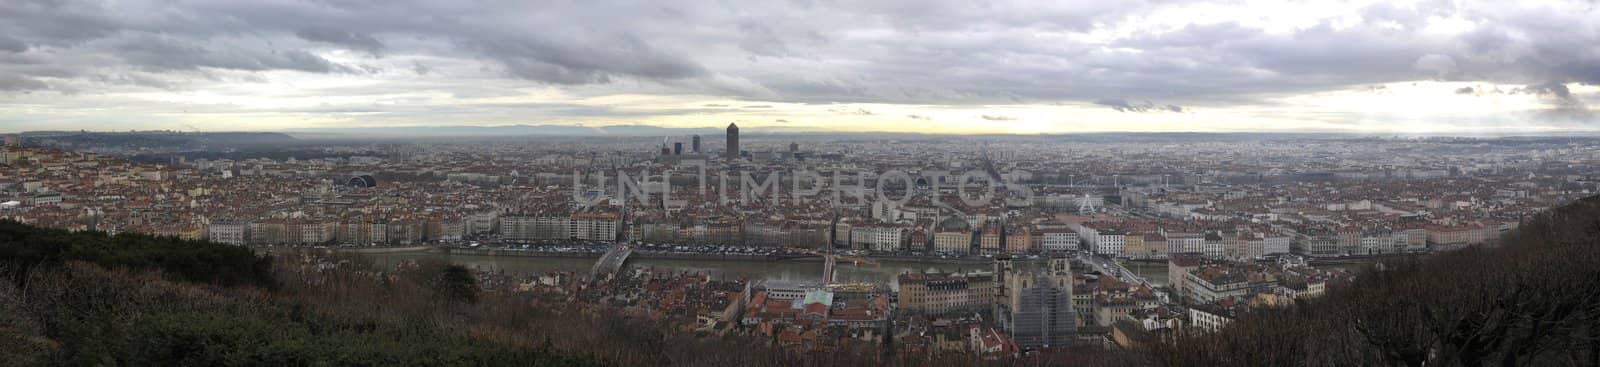 Panoramic view of Lyon city during a cloudy day